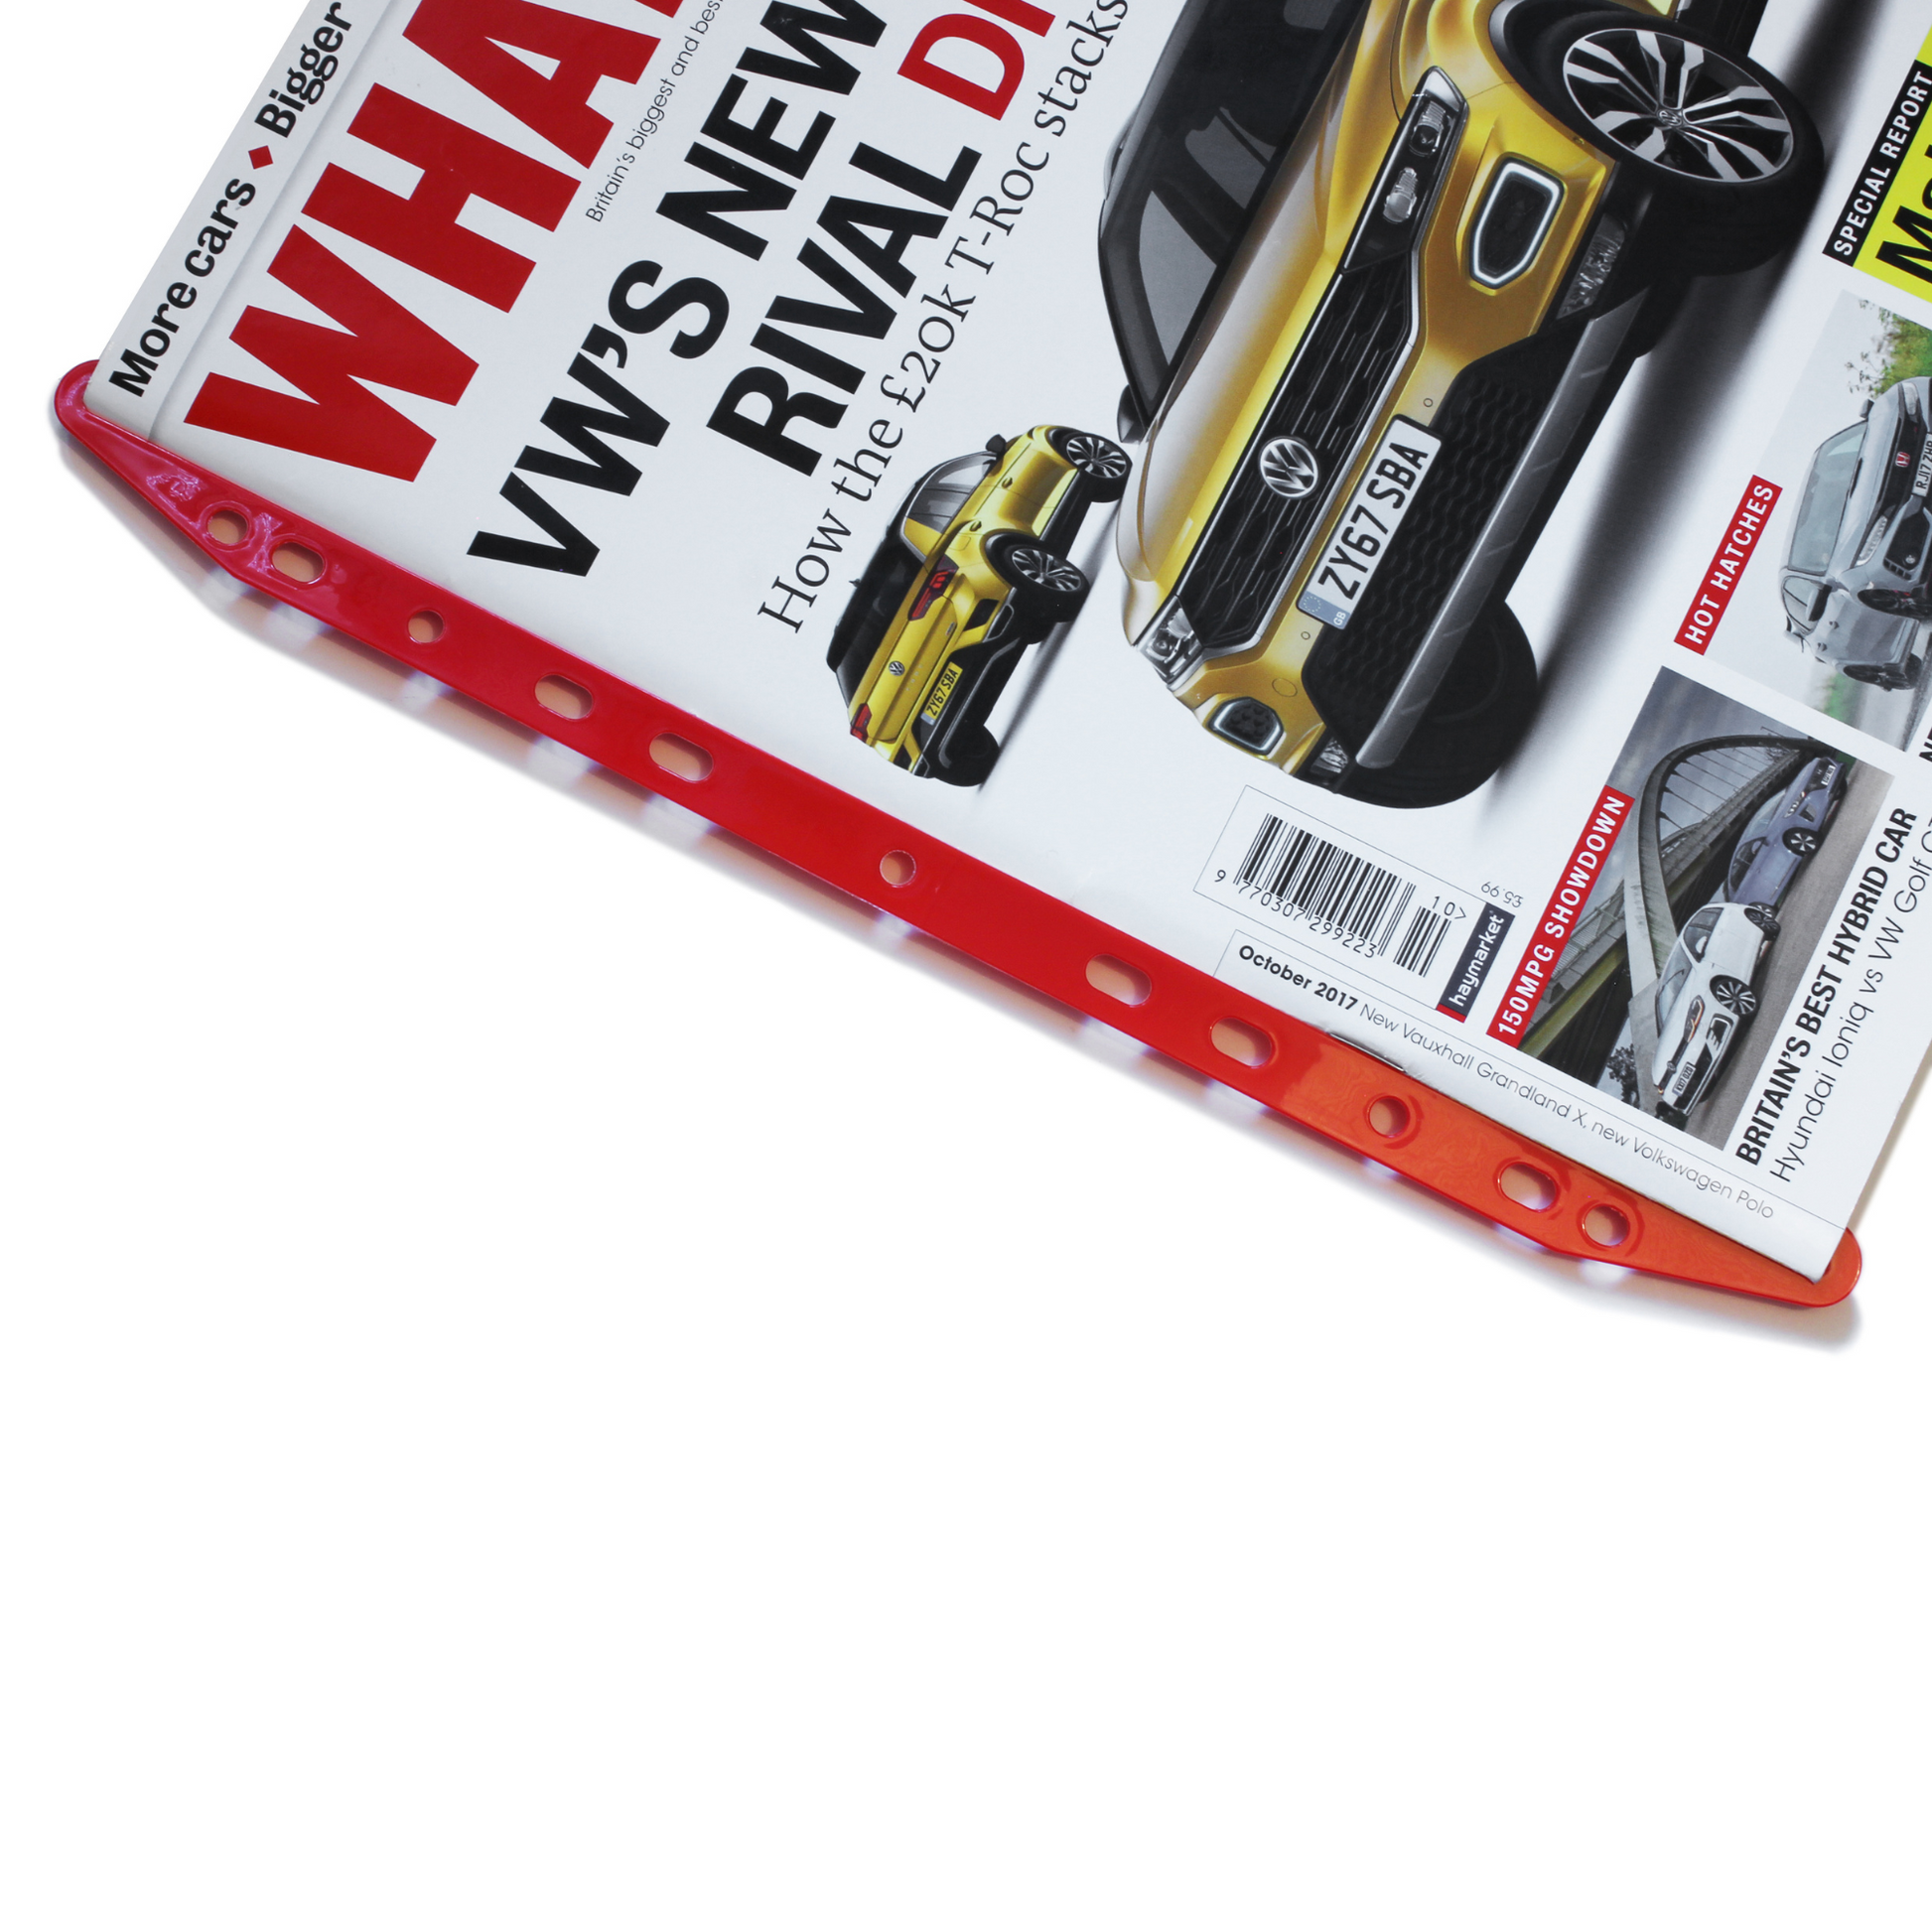 A close-up of a red Magi Clip multi-punched magazine storage clip holding an issue of 'WHAT CAR?' magazine, showcasing a yellow sports car on the cover.